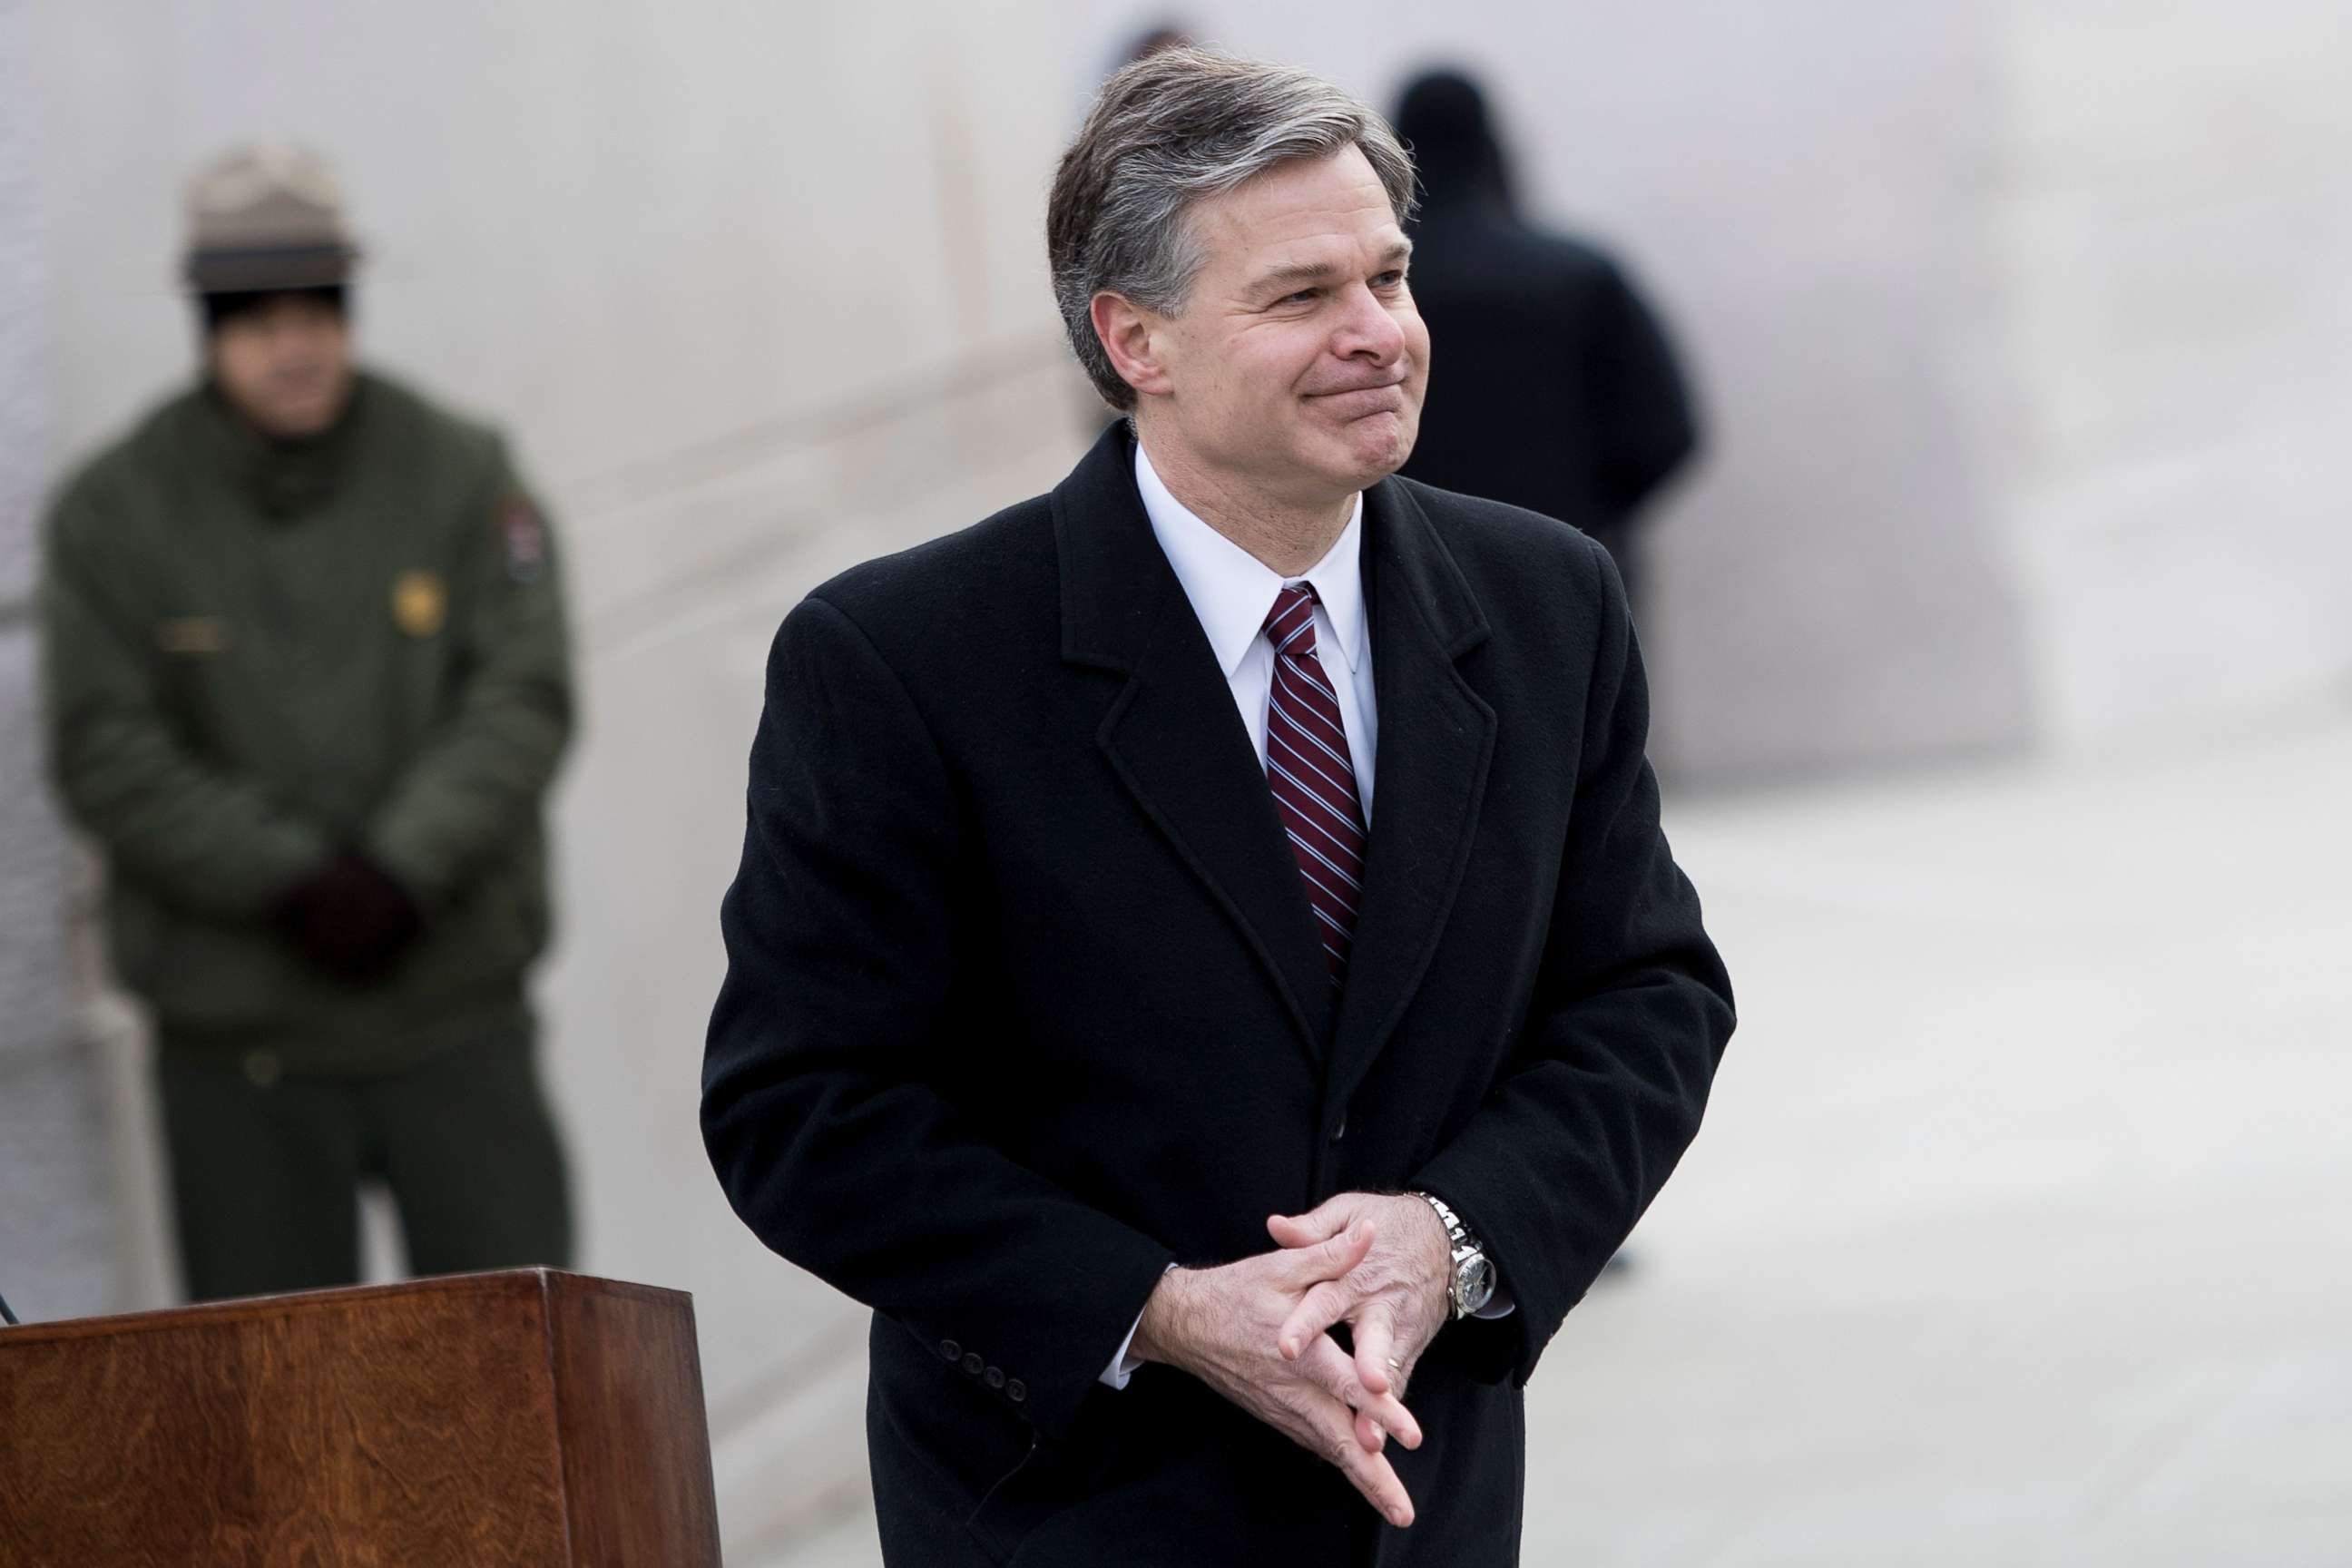 PHOTO: Director of the Federal Bureau of Investigation Christopher A. Wray speaks during an event at the Martin Luther King Memorial on the National Mall, Jan. 15, 2018, in Washington, DC.